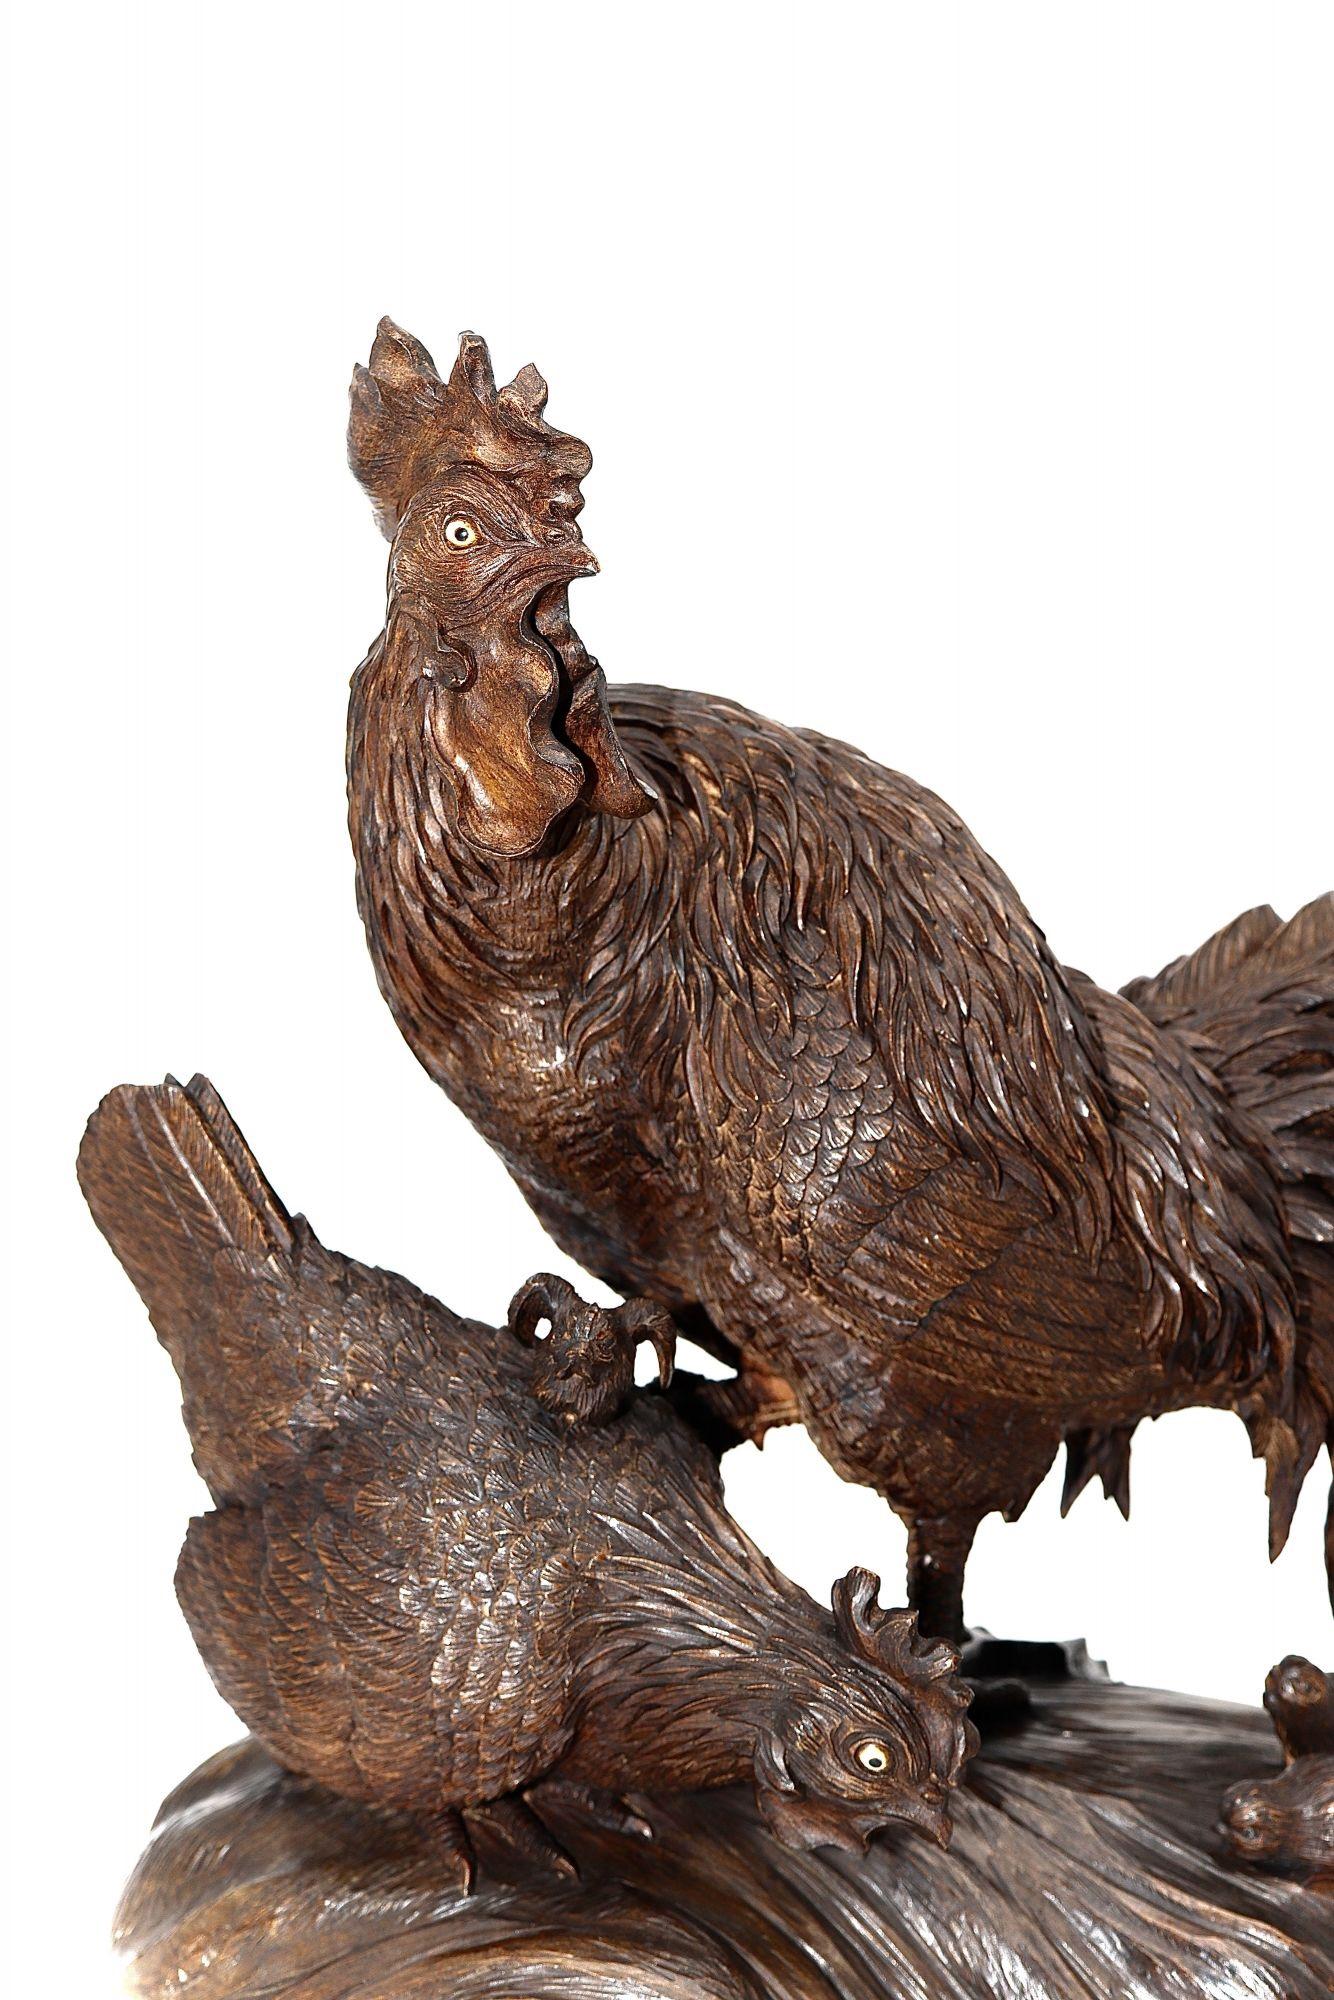 A finely signed Japanese carved large cockerel with an impressive plume of tail feathers standing over his family consisting of a hen and baby chicks as they pick at the ground searching for food. The details finely wrought and highlighted with